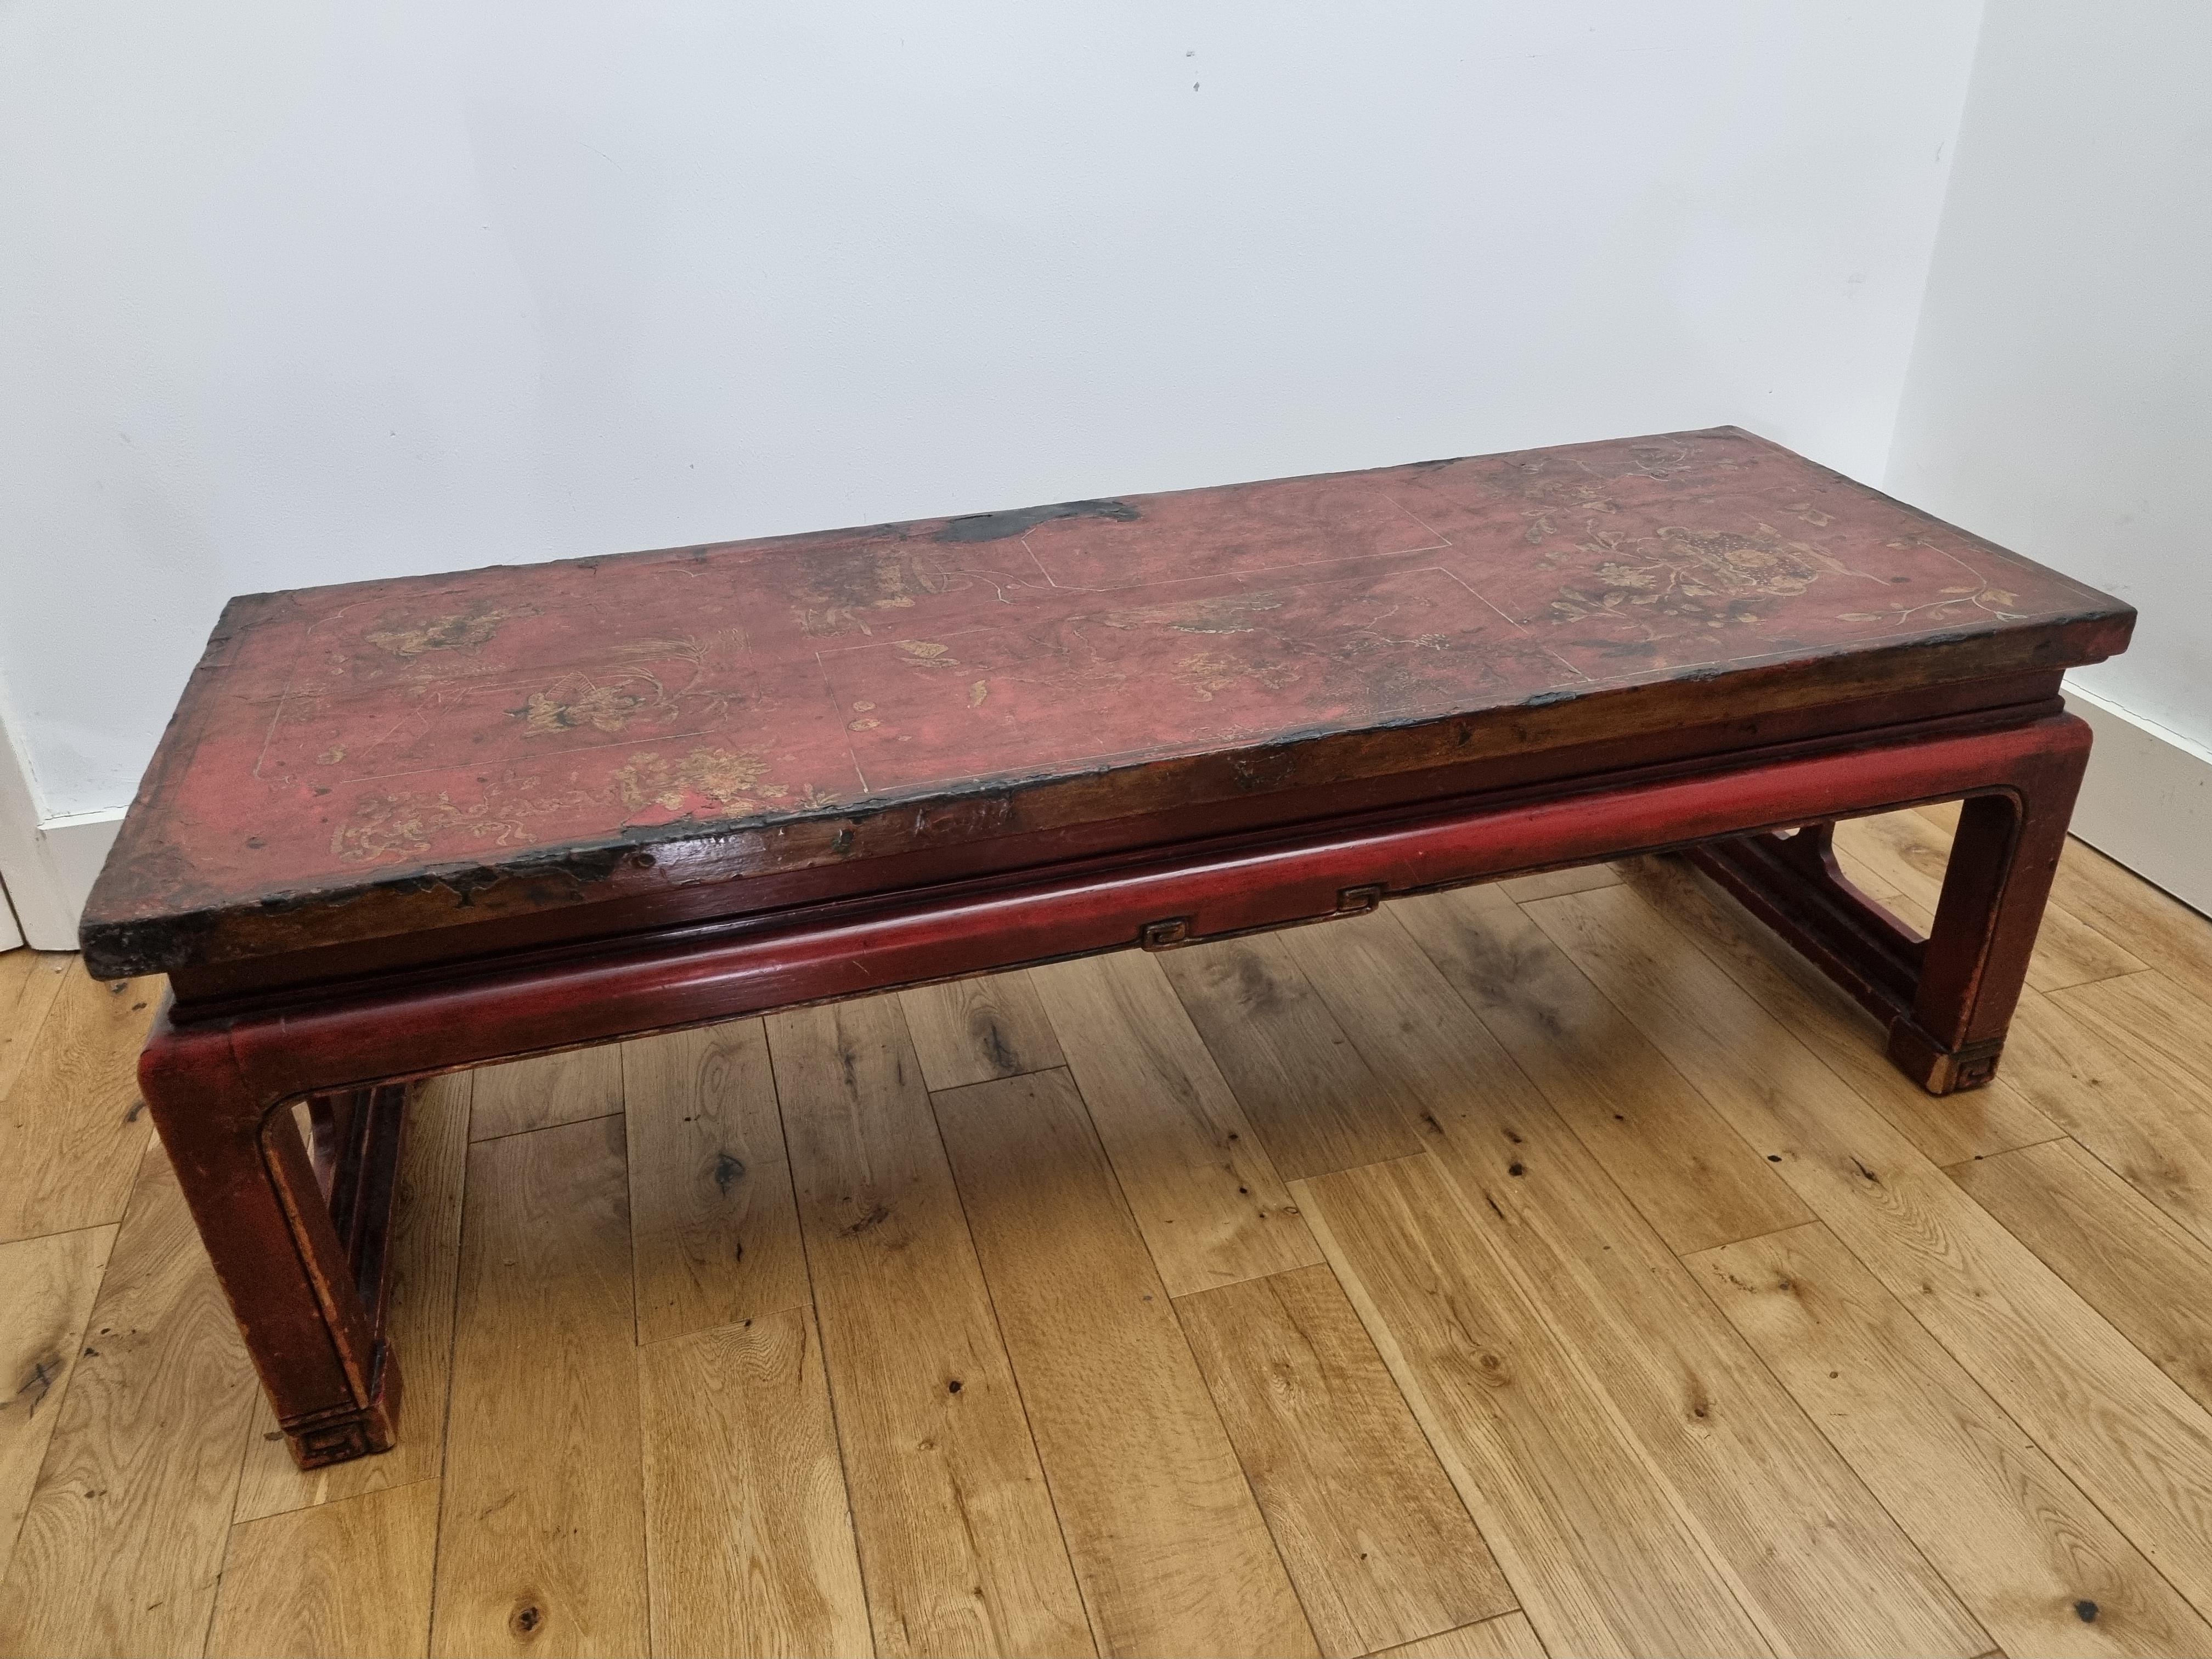 Late 19th Century 19th Century Red Lacquered Chinese Low Coffee Table from Shanxi Province